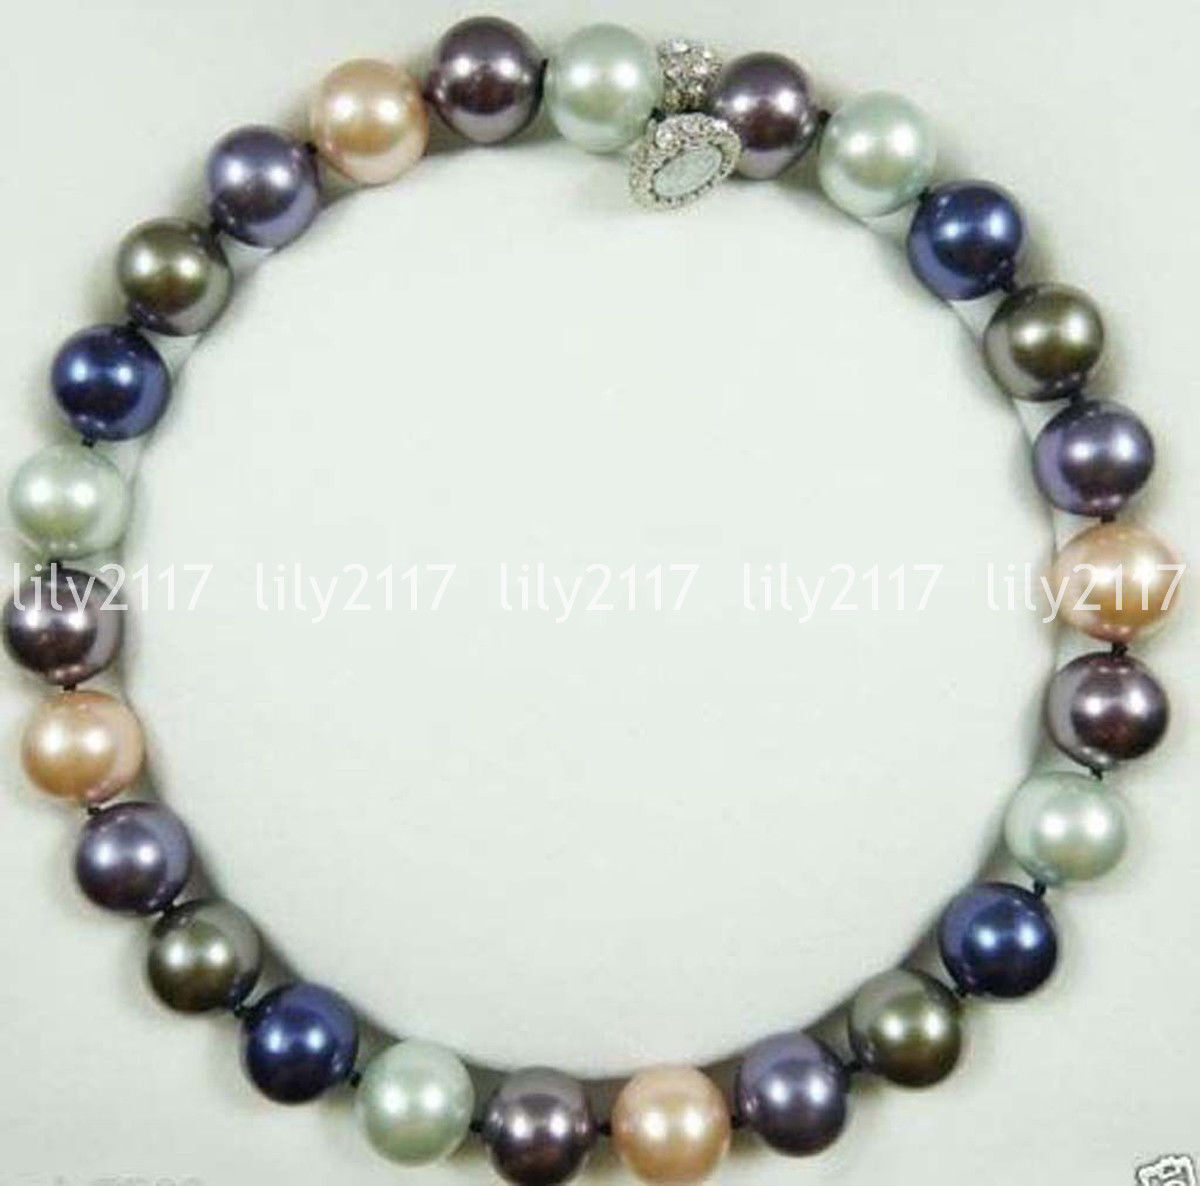 Rare Huge 14mm Real Multi-color Round South Sea Shell Pearl Necklace 18\'\'